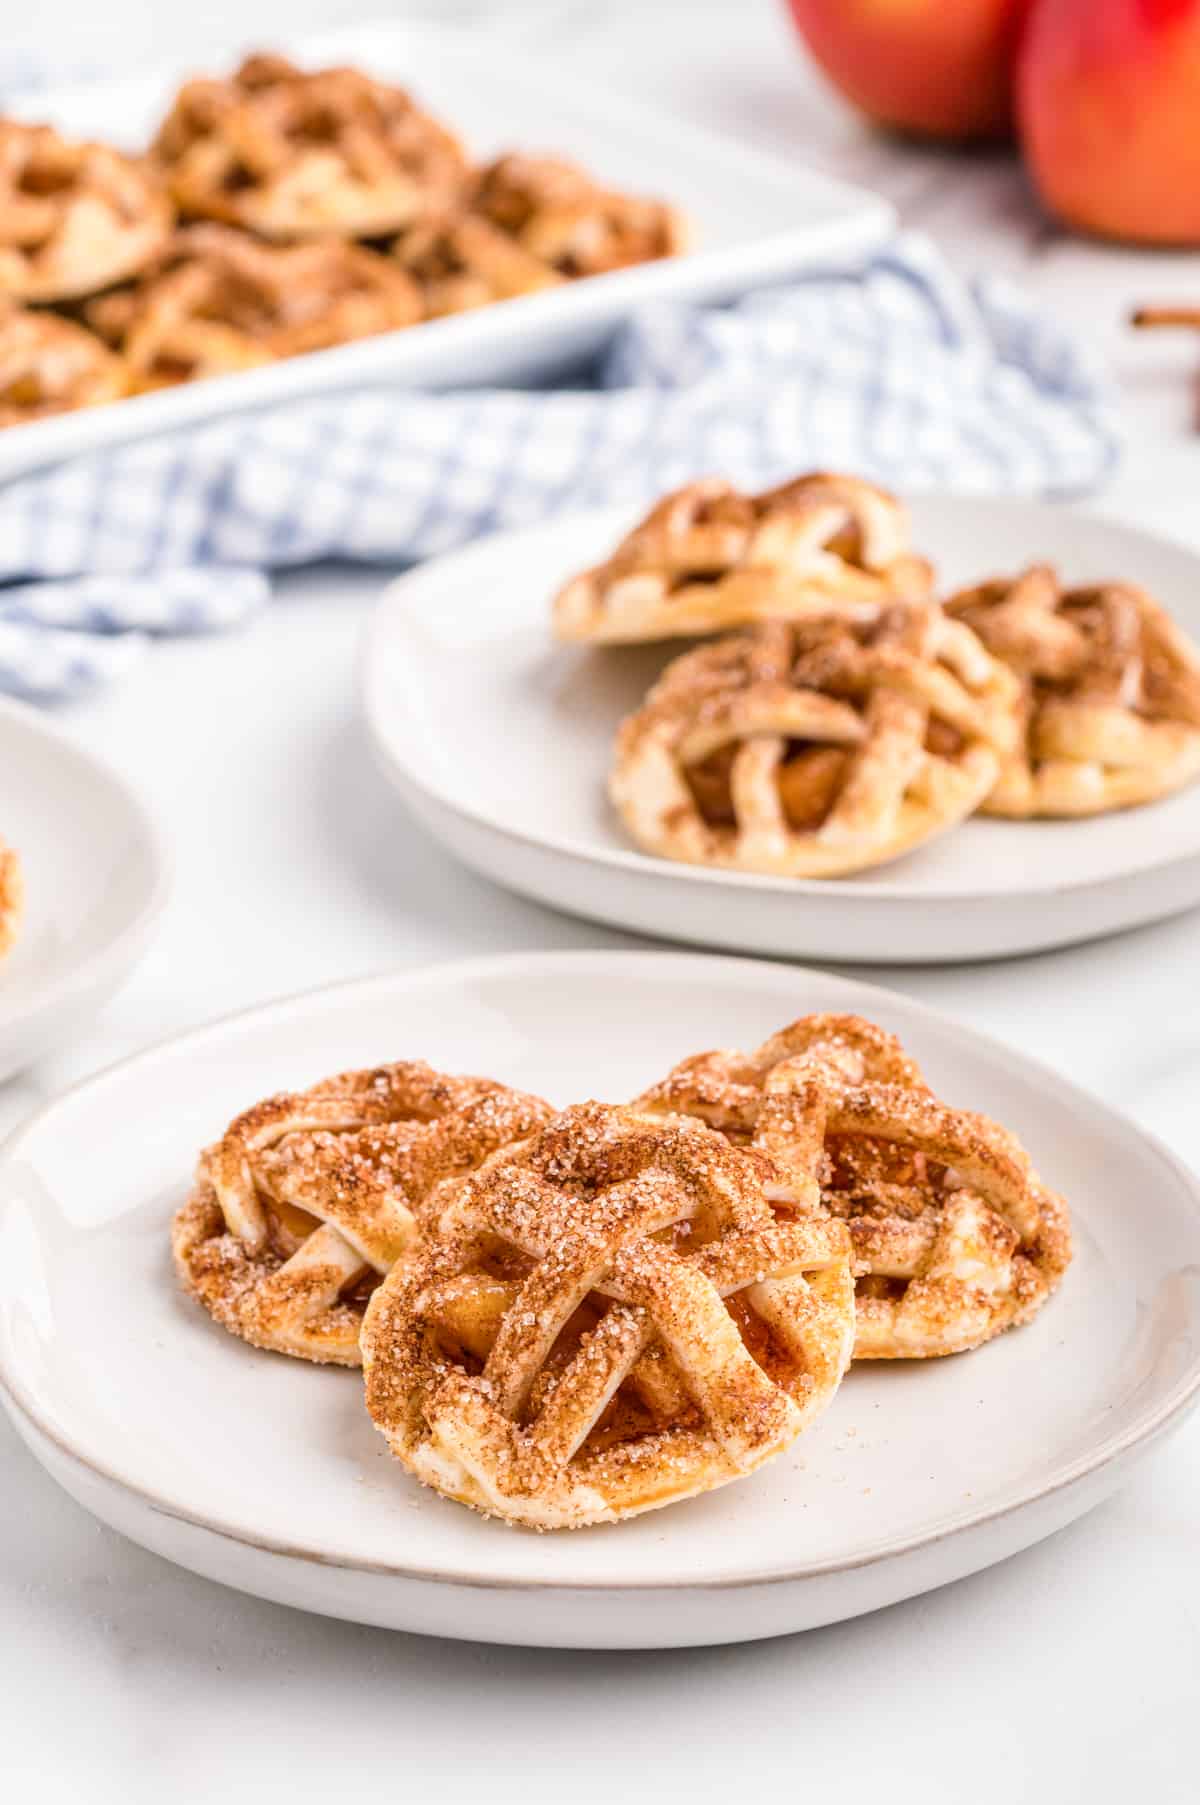 Apple pie cookies on white plates with cloth napkin and red apples in background